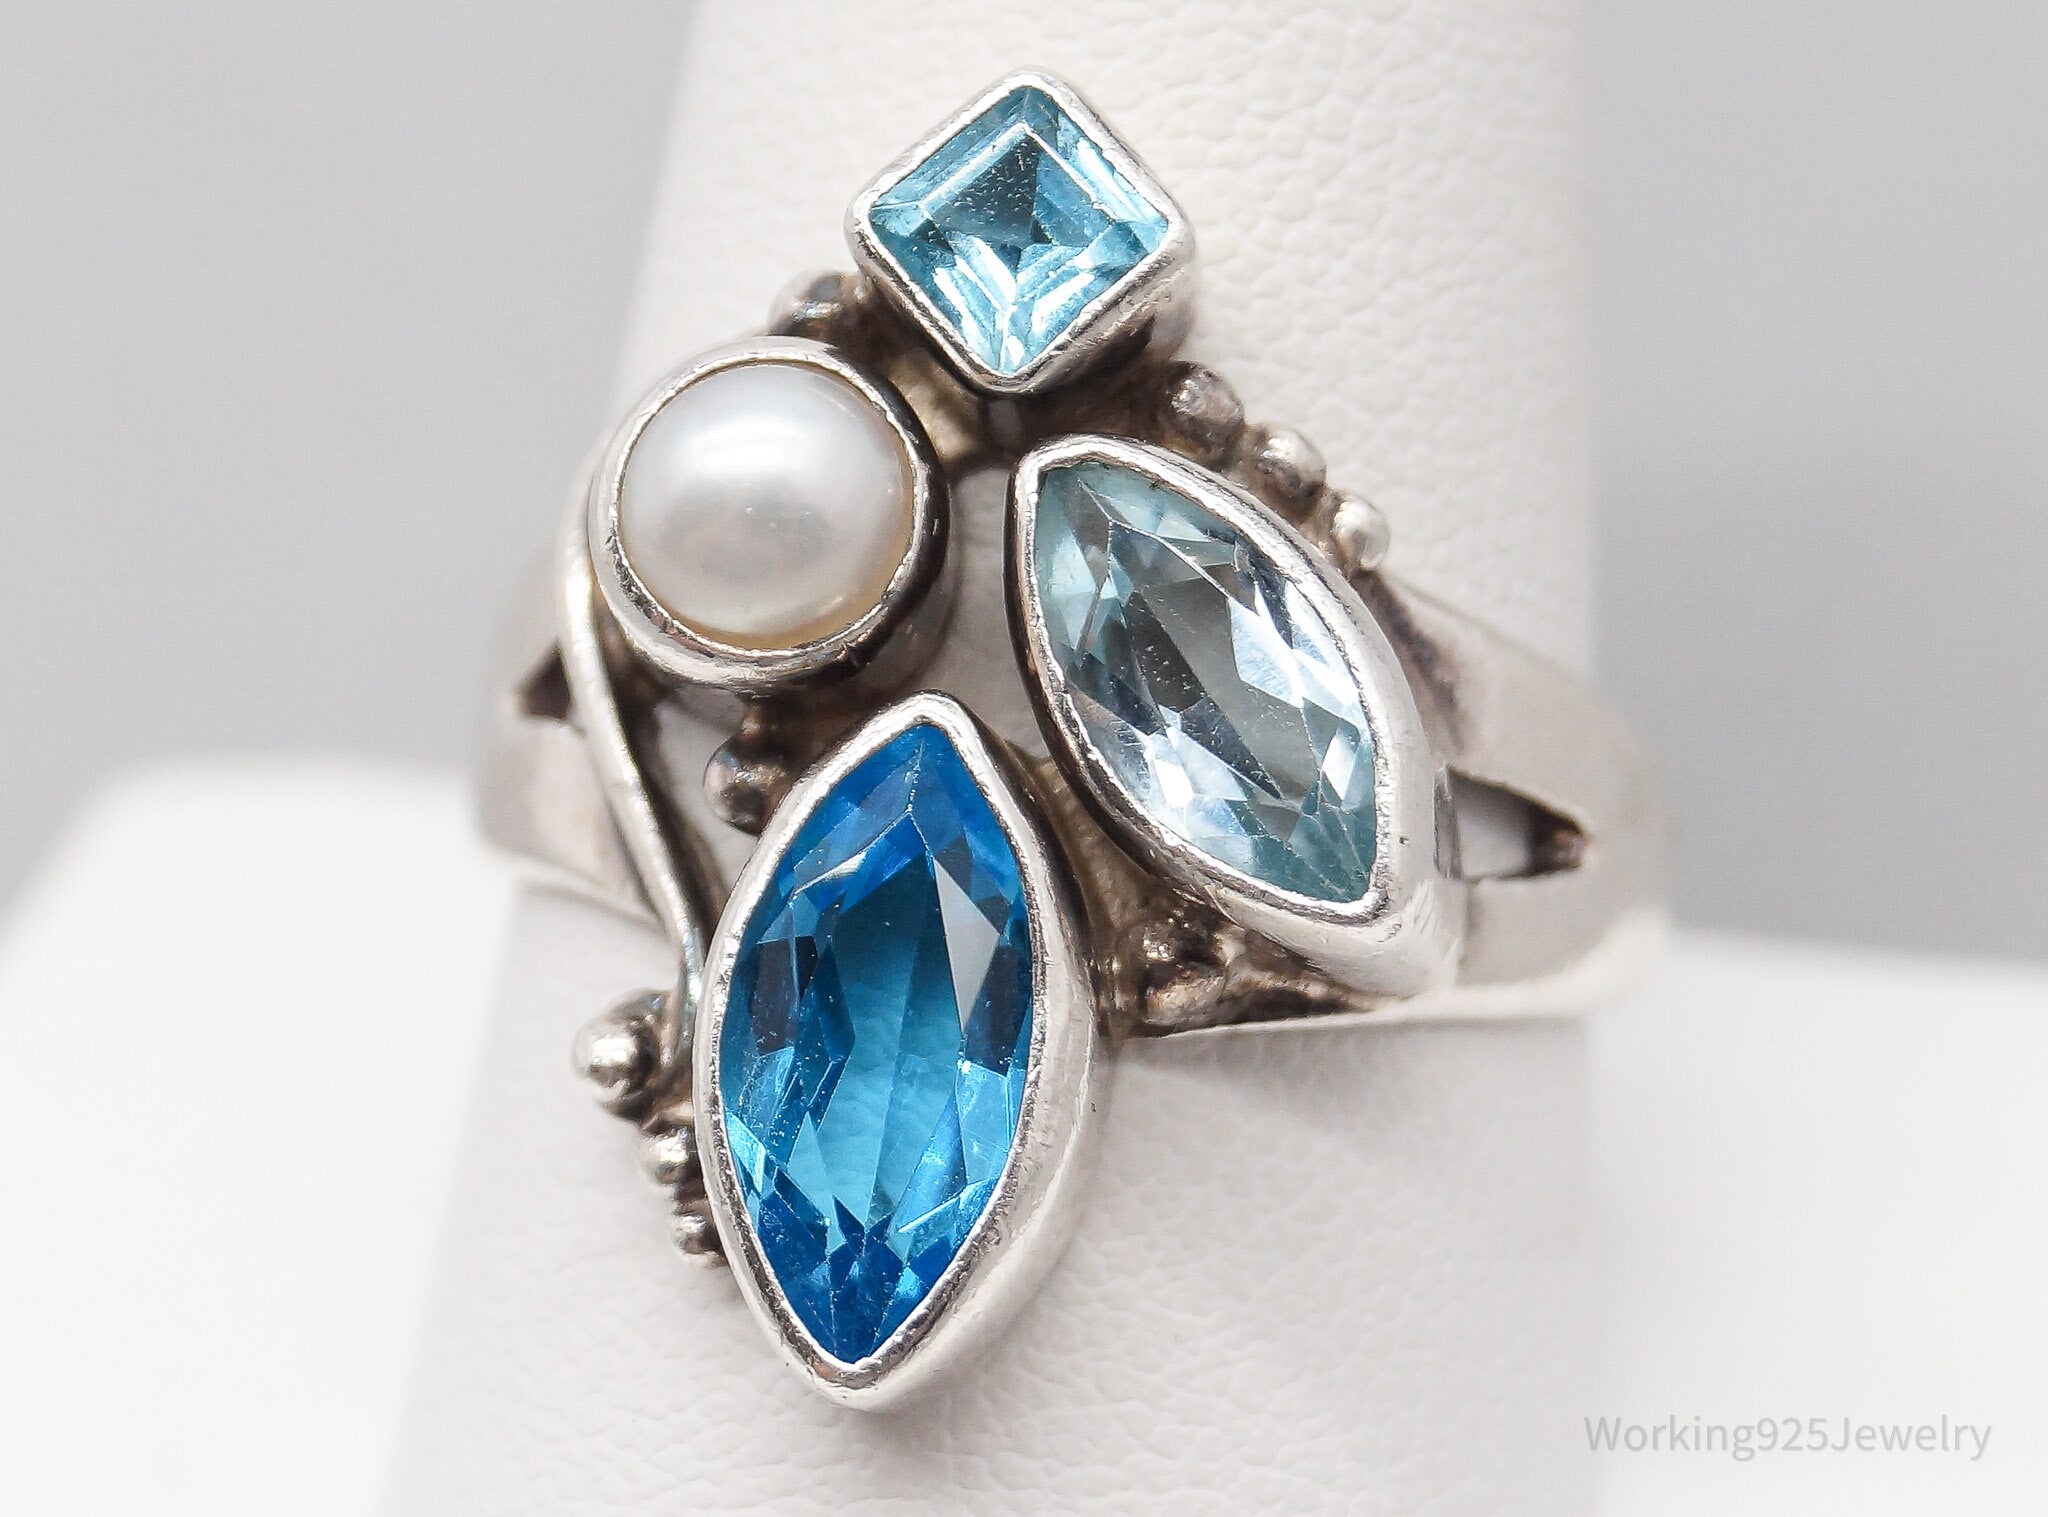 Vintage White Pearl & Blue Topaz Sterling Silver Ring - Size 10